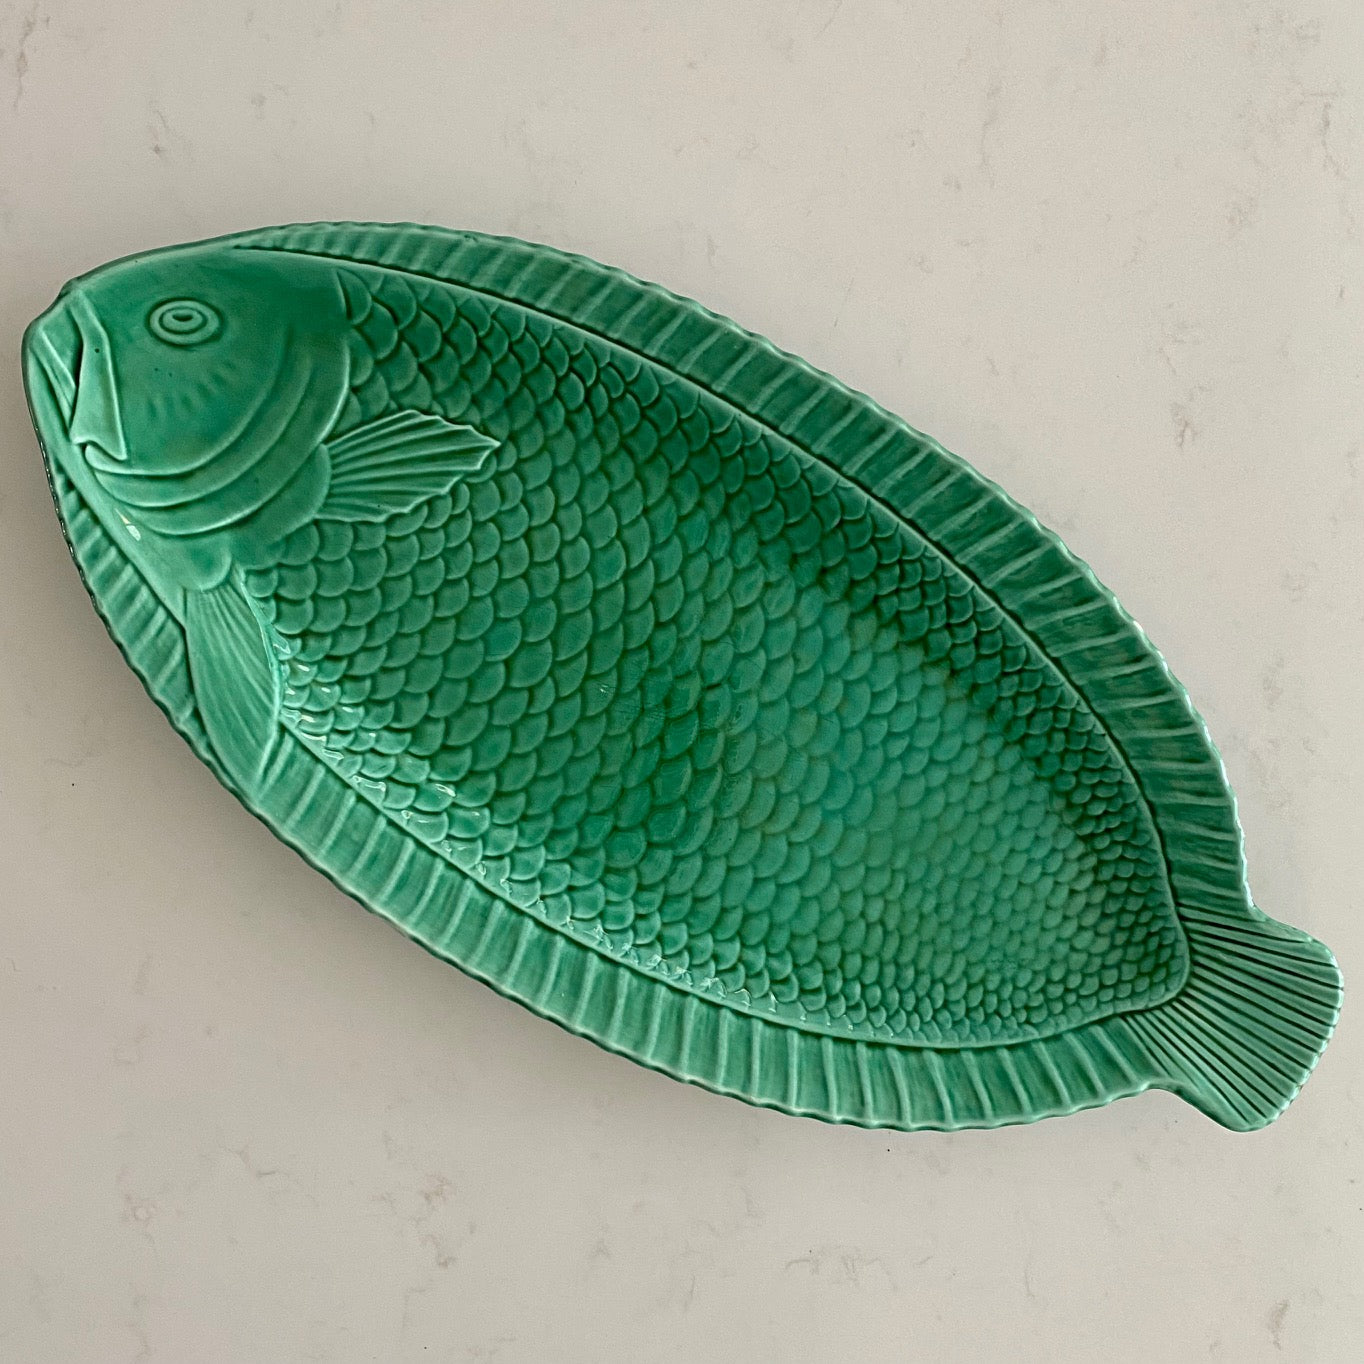 S35 LARGE VINTAGE 1930’S FRENCH MAJOLICA GREEN FISH PLATTER